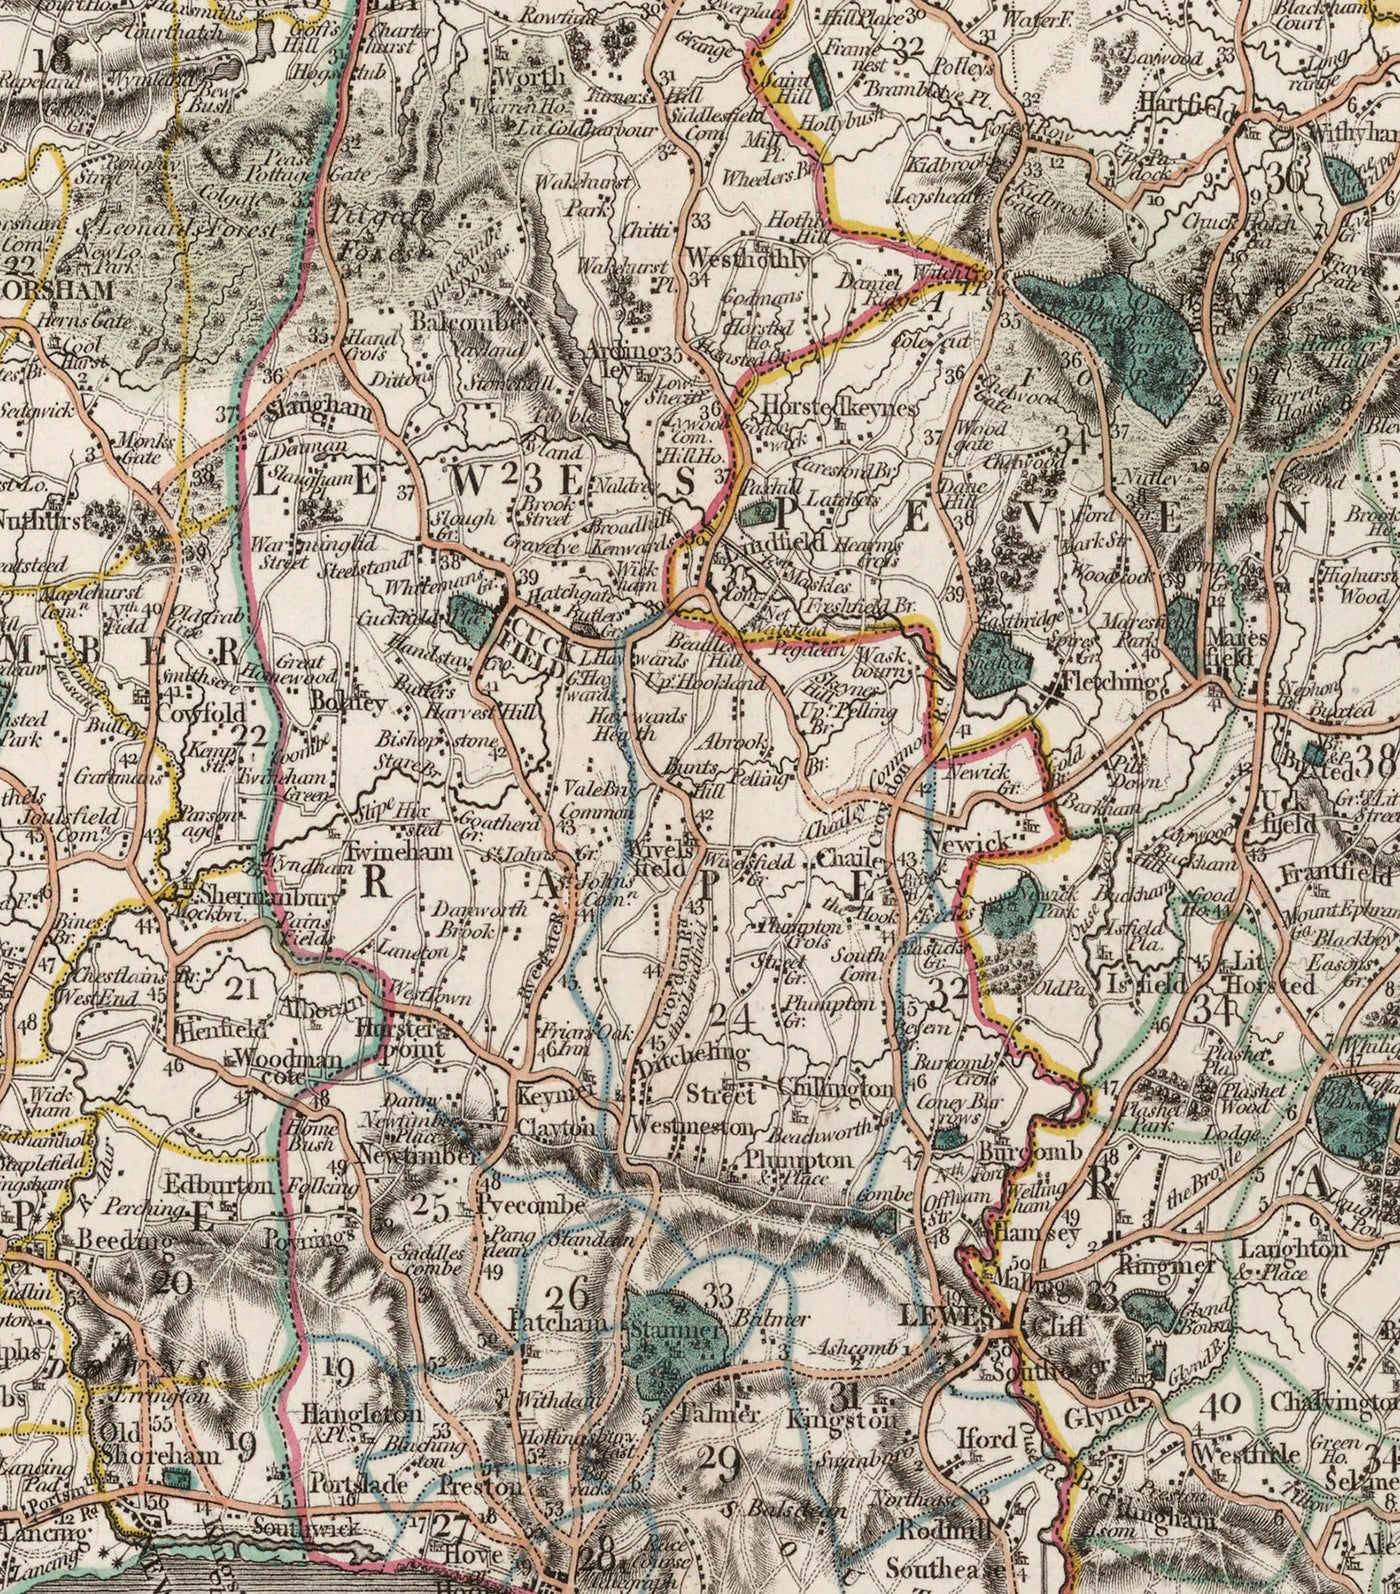 Old Map of Sussex in 1801 by John Cary - Brighton, Hastings, Eastbourne, Preston, Dumford